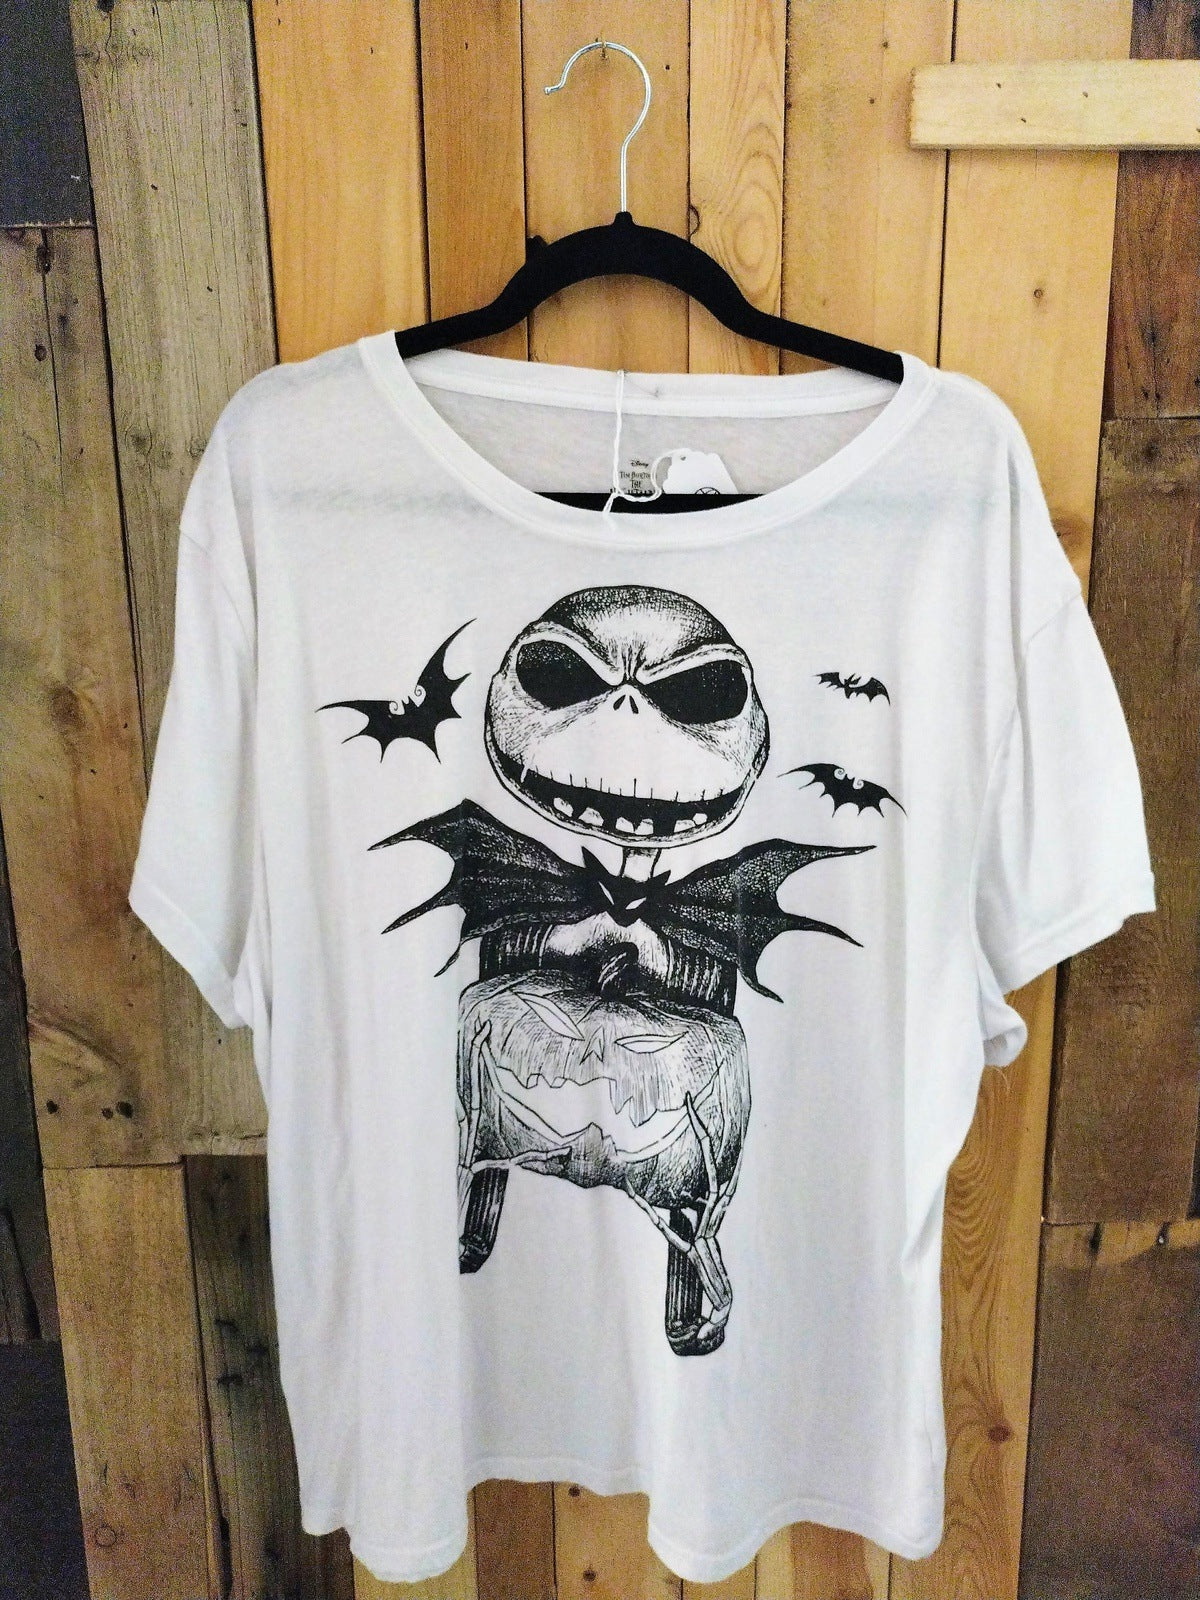 Nightmare Before Christmas Official Merchandise Women's T Shirt Size 2X